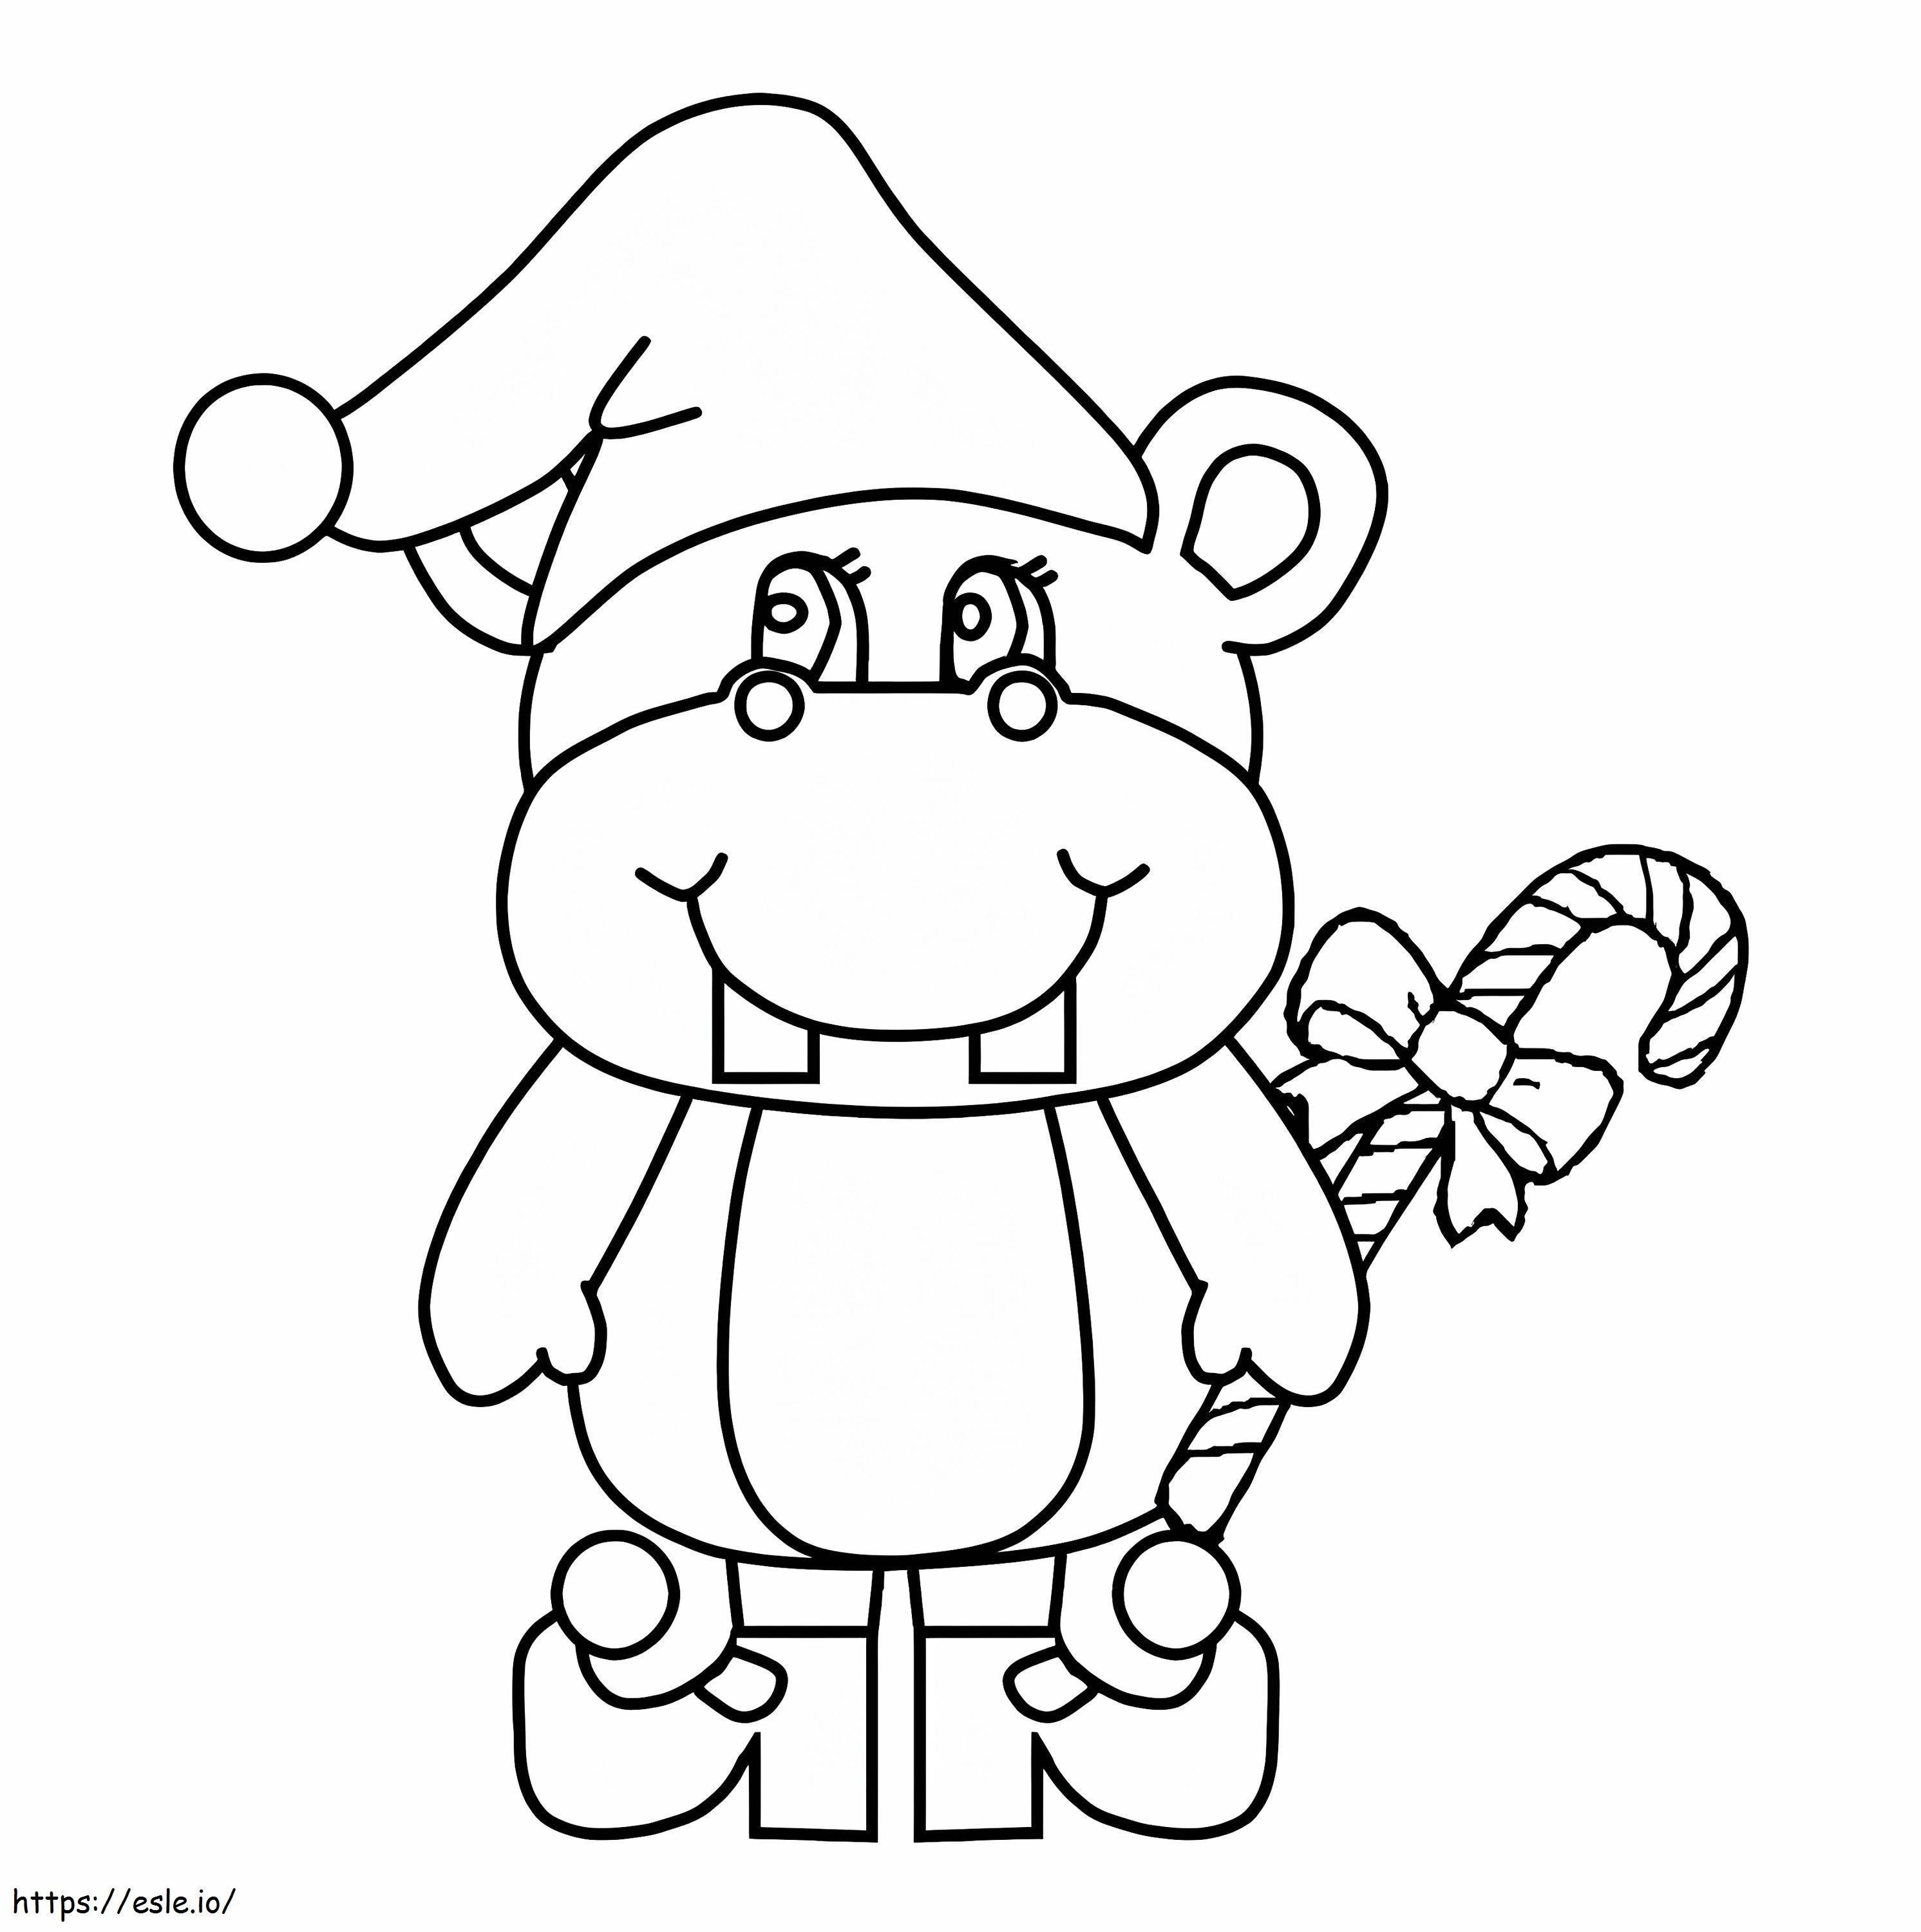 Christmas Hippo coloring page